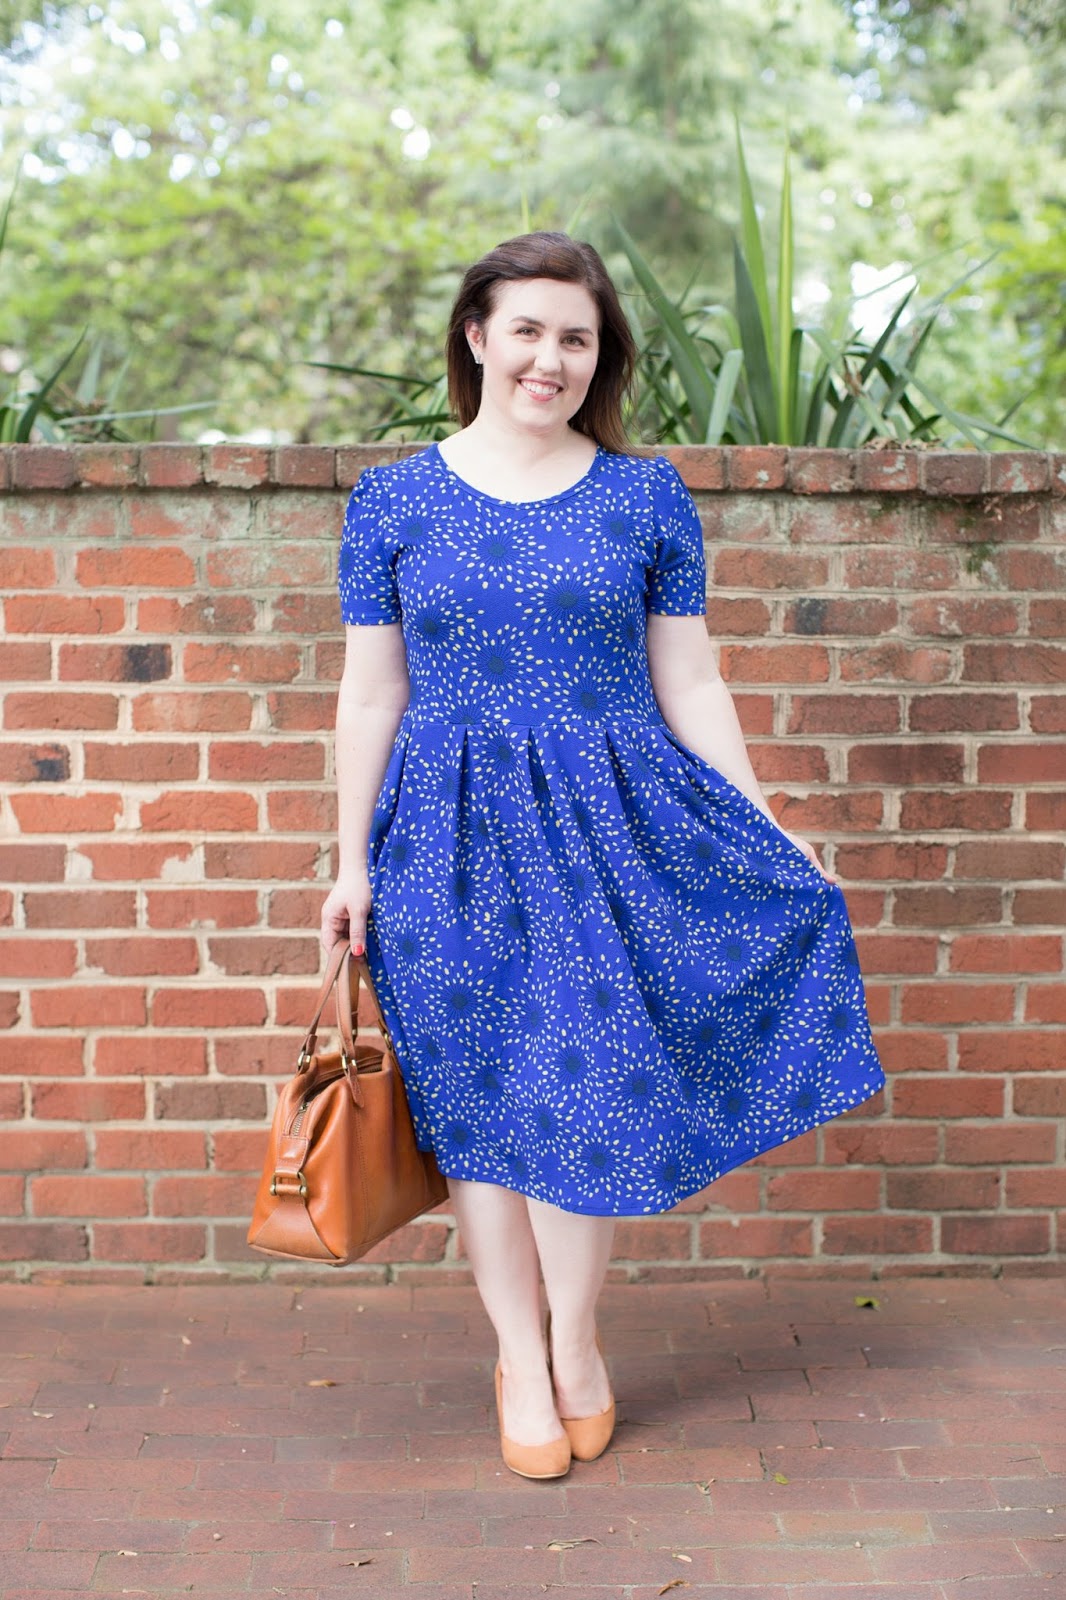 Dresses with Pockets are Amazing - Rebecca Lately